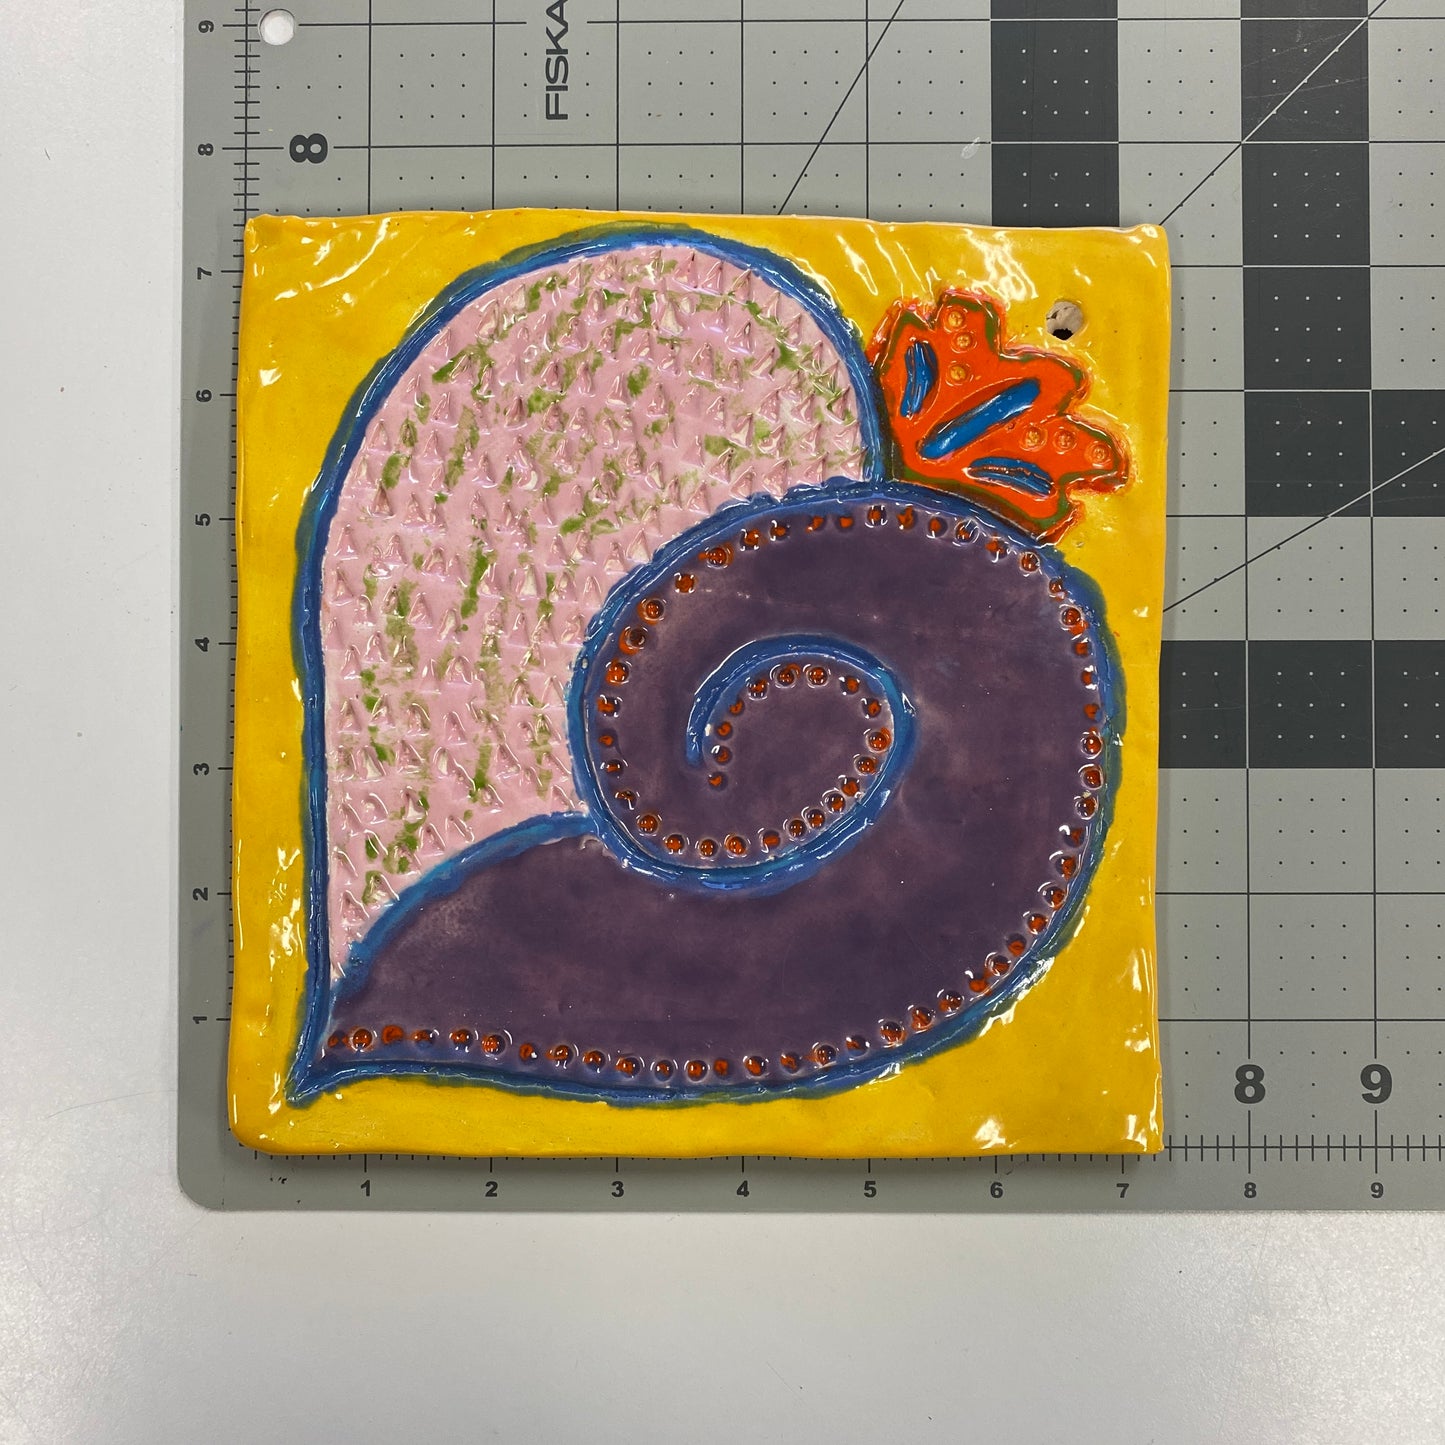 Ceramic Arts Handmade Clay Crafts 7.5-inch x 7-inch Glazed Heart Tile by Lisa Uptain